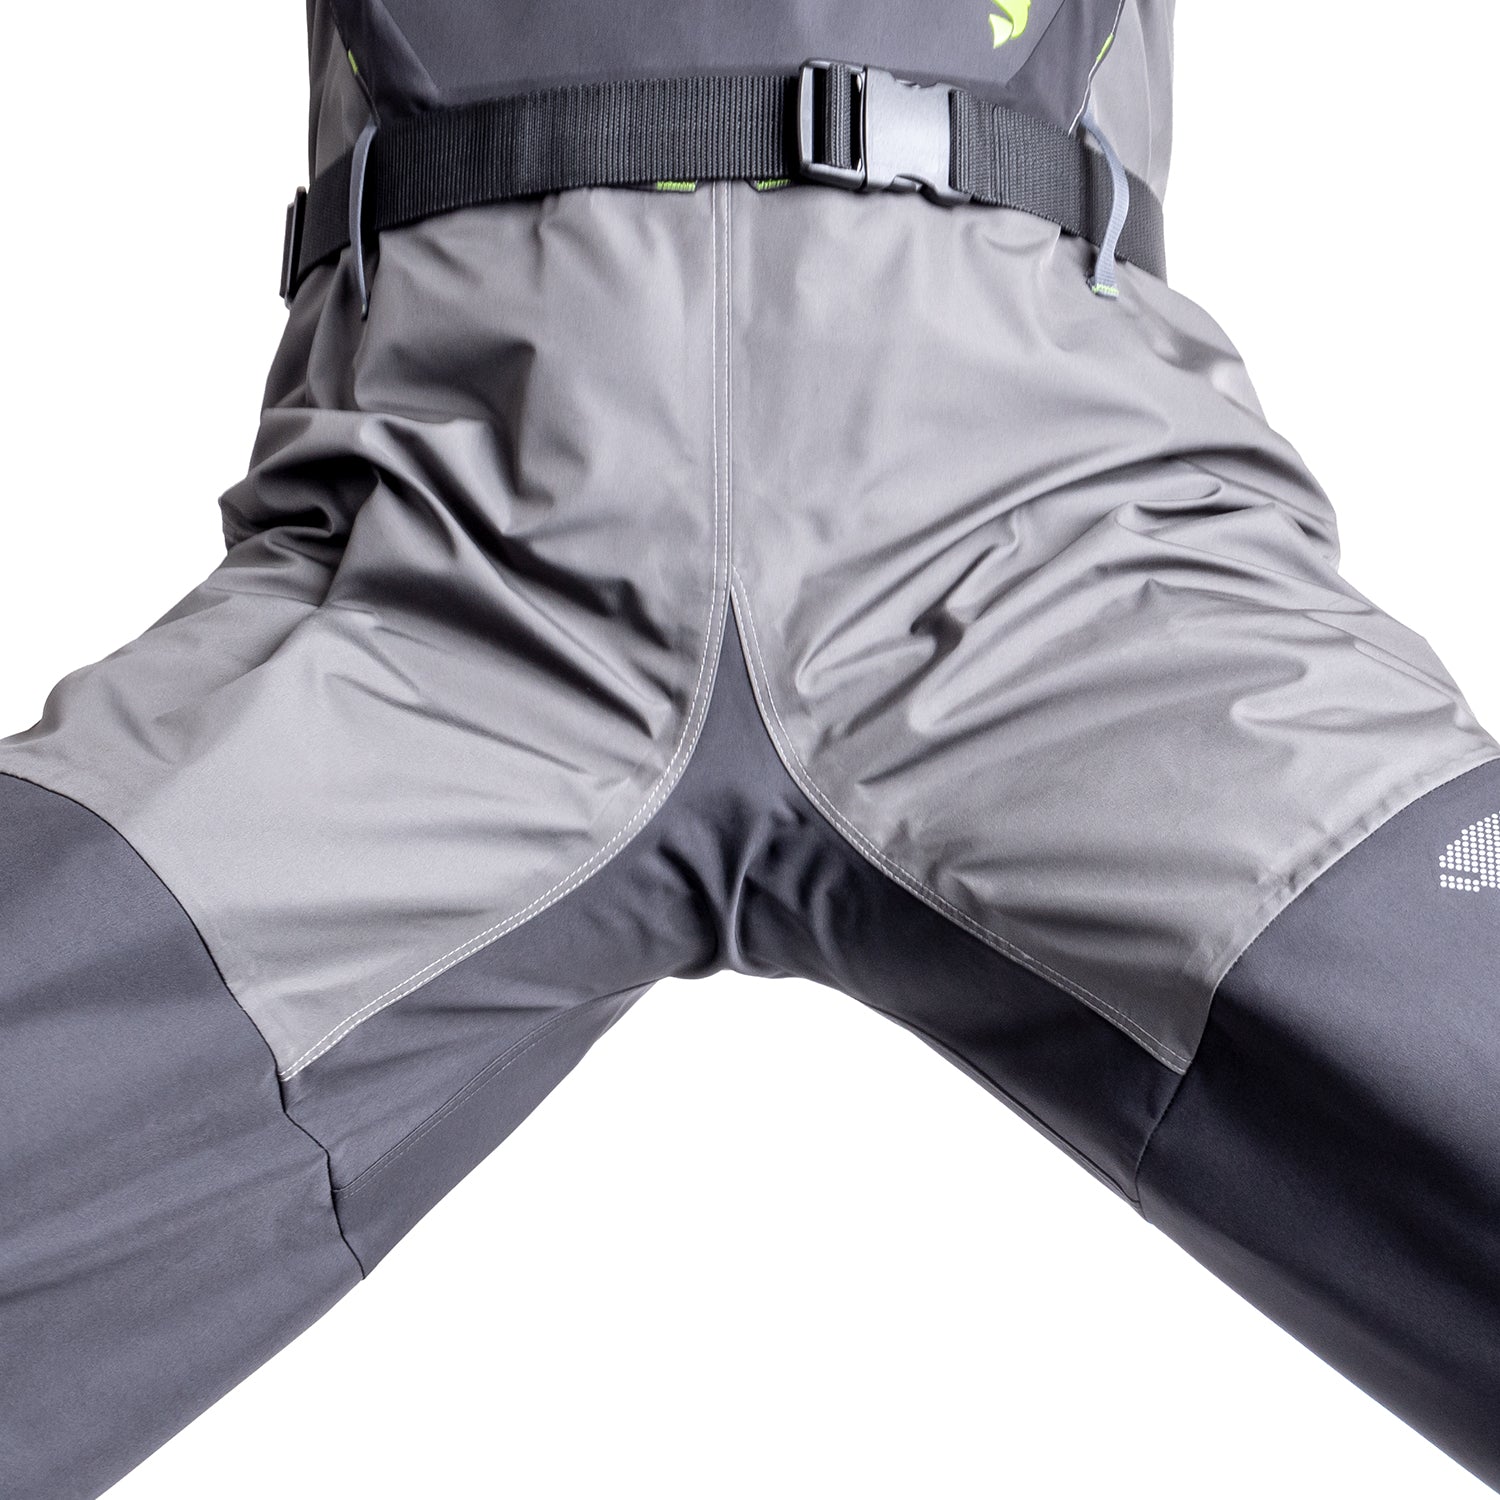 Five layer reinforced key areas enhance the durability of the DRYFT S13  waders - DRYFT™ Fishing Waders